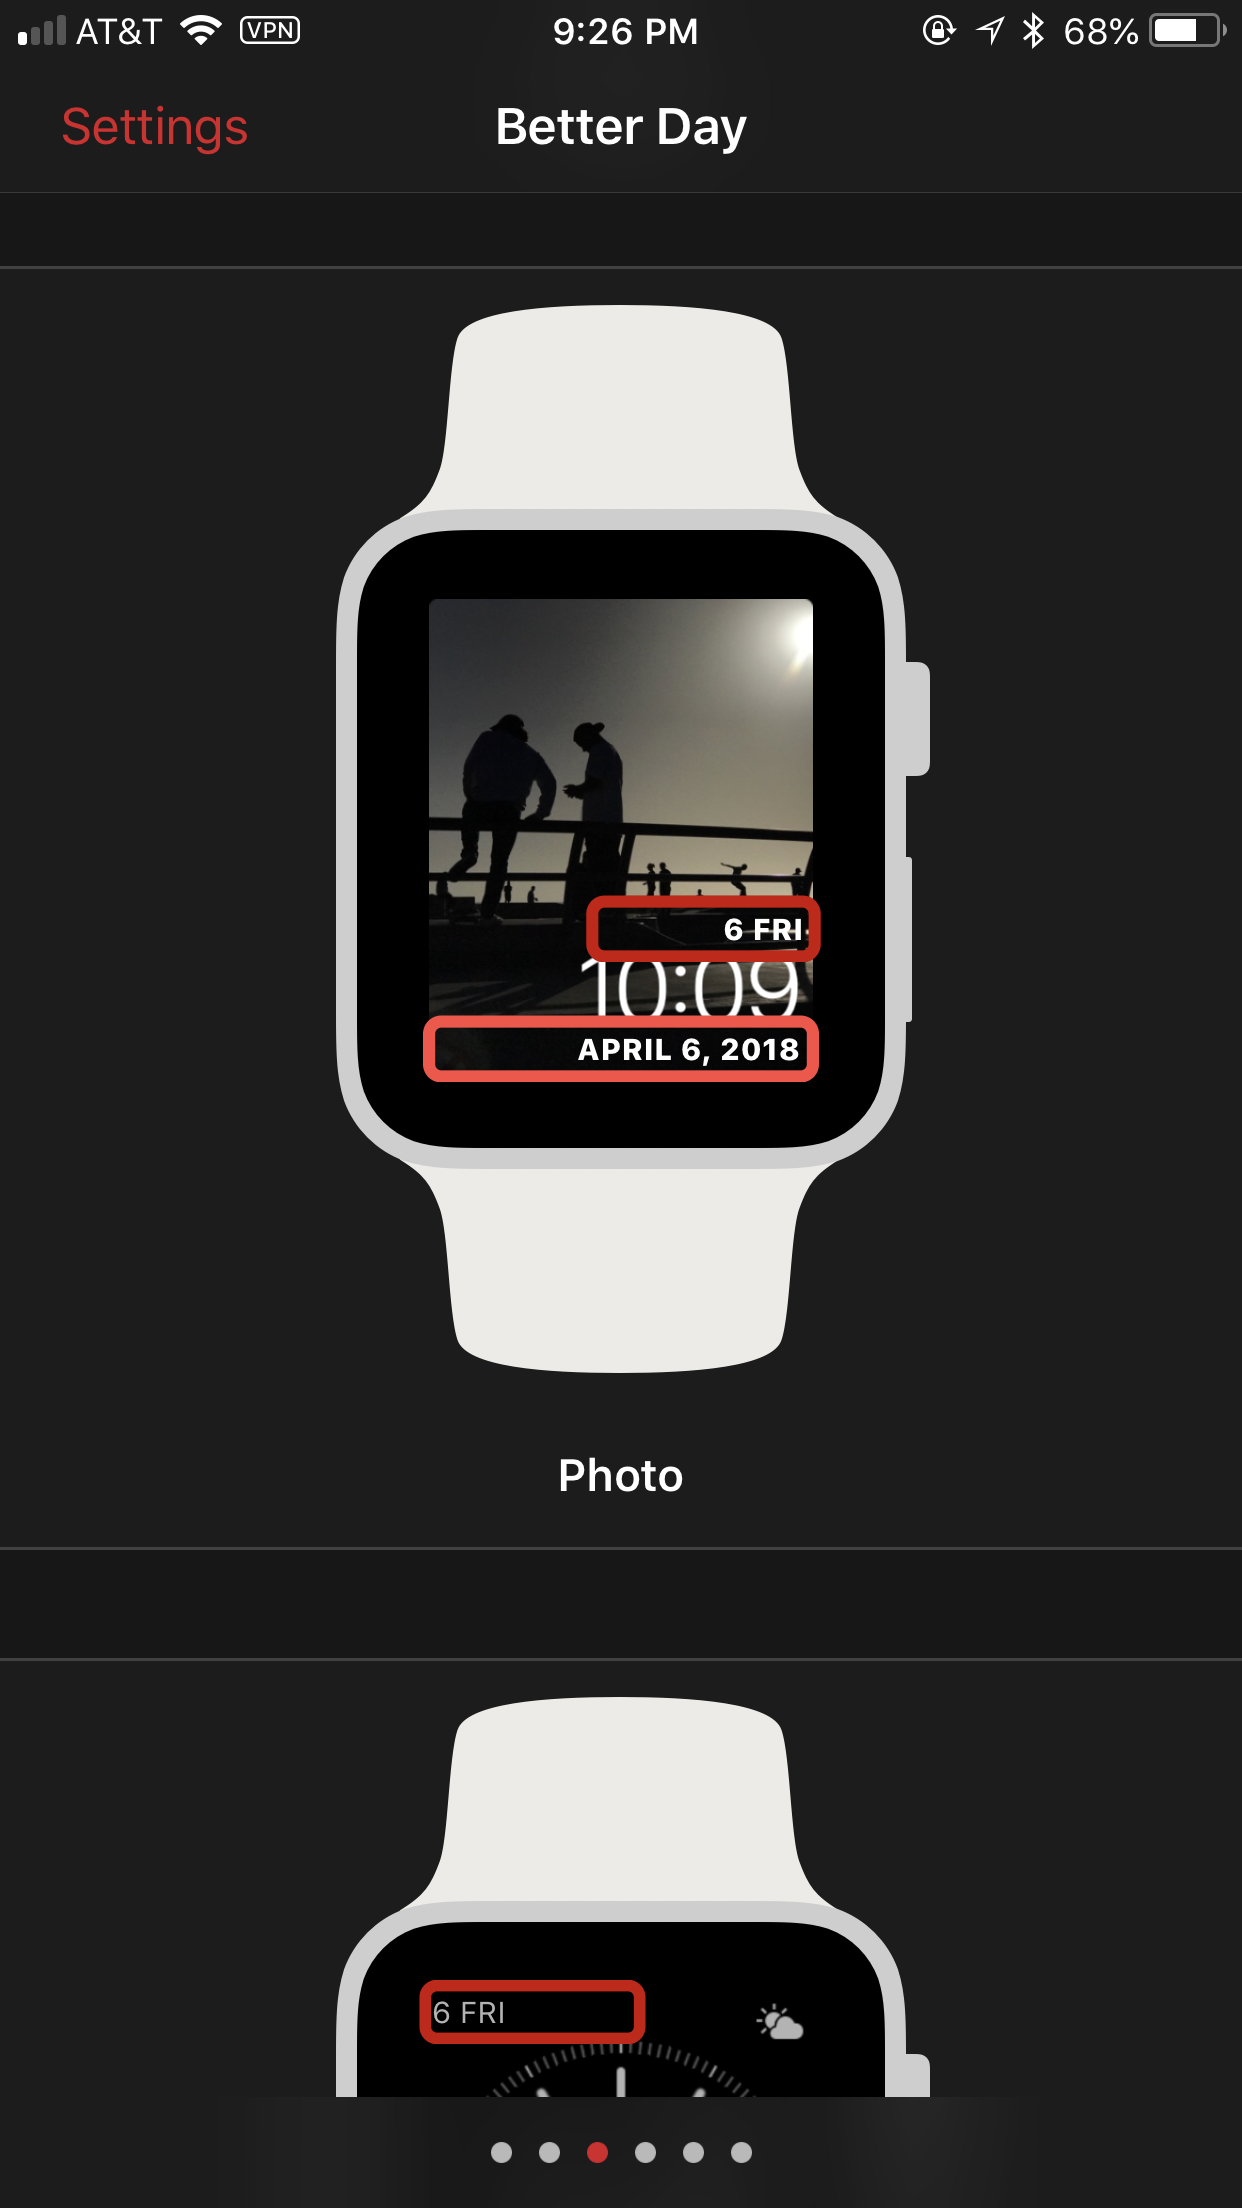 The configurator displaying the photo watch face with Better Day in both the slot above and below the time. At bottom, the simple watch face is also visible showing Better Day in one of the corners.